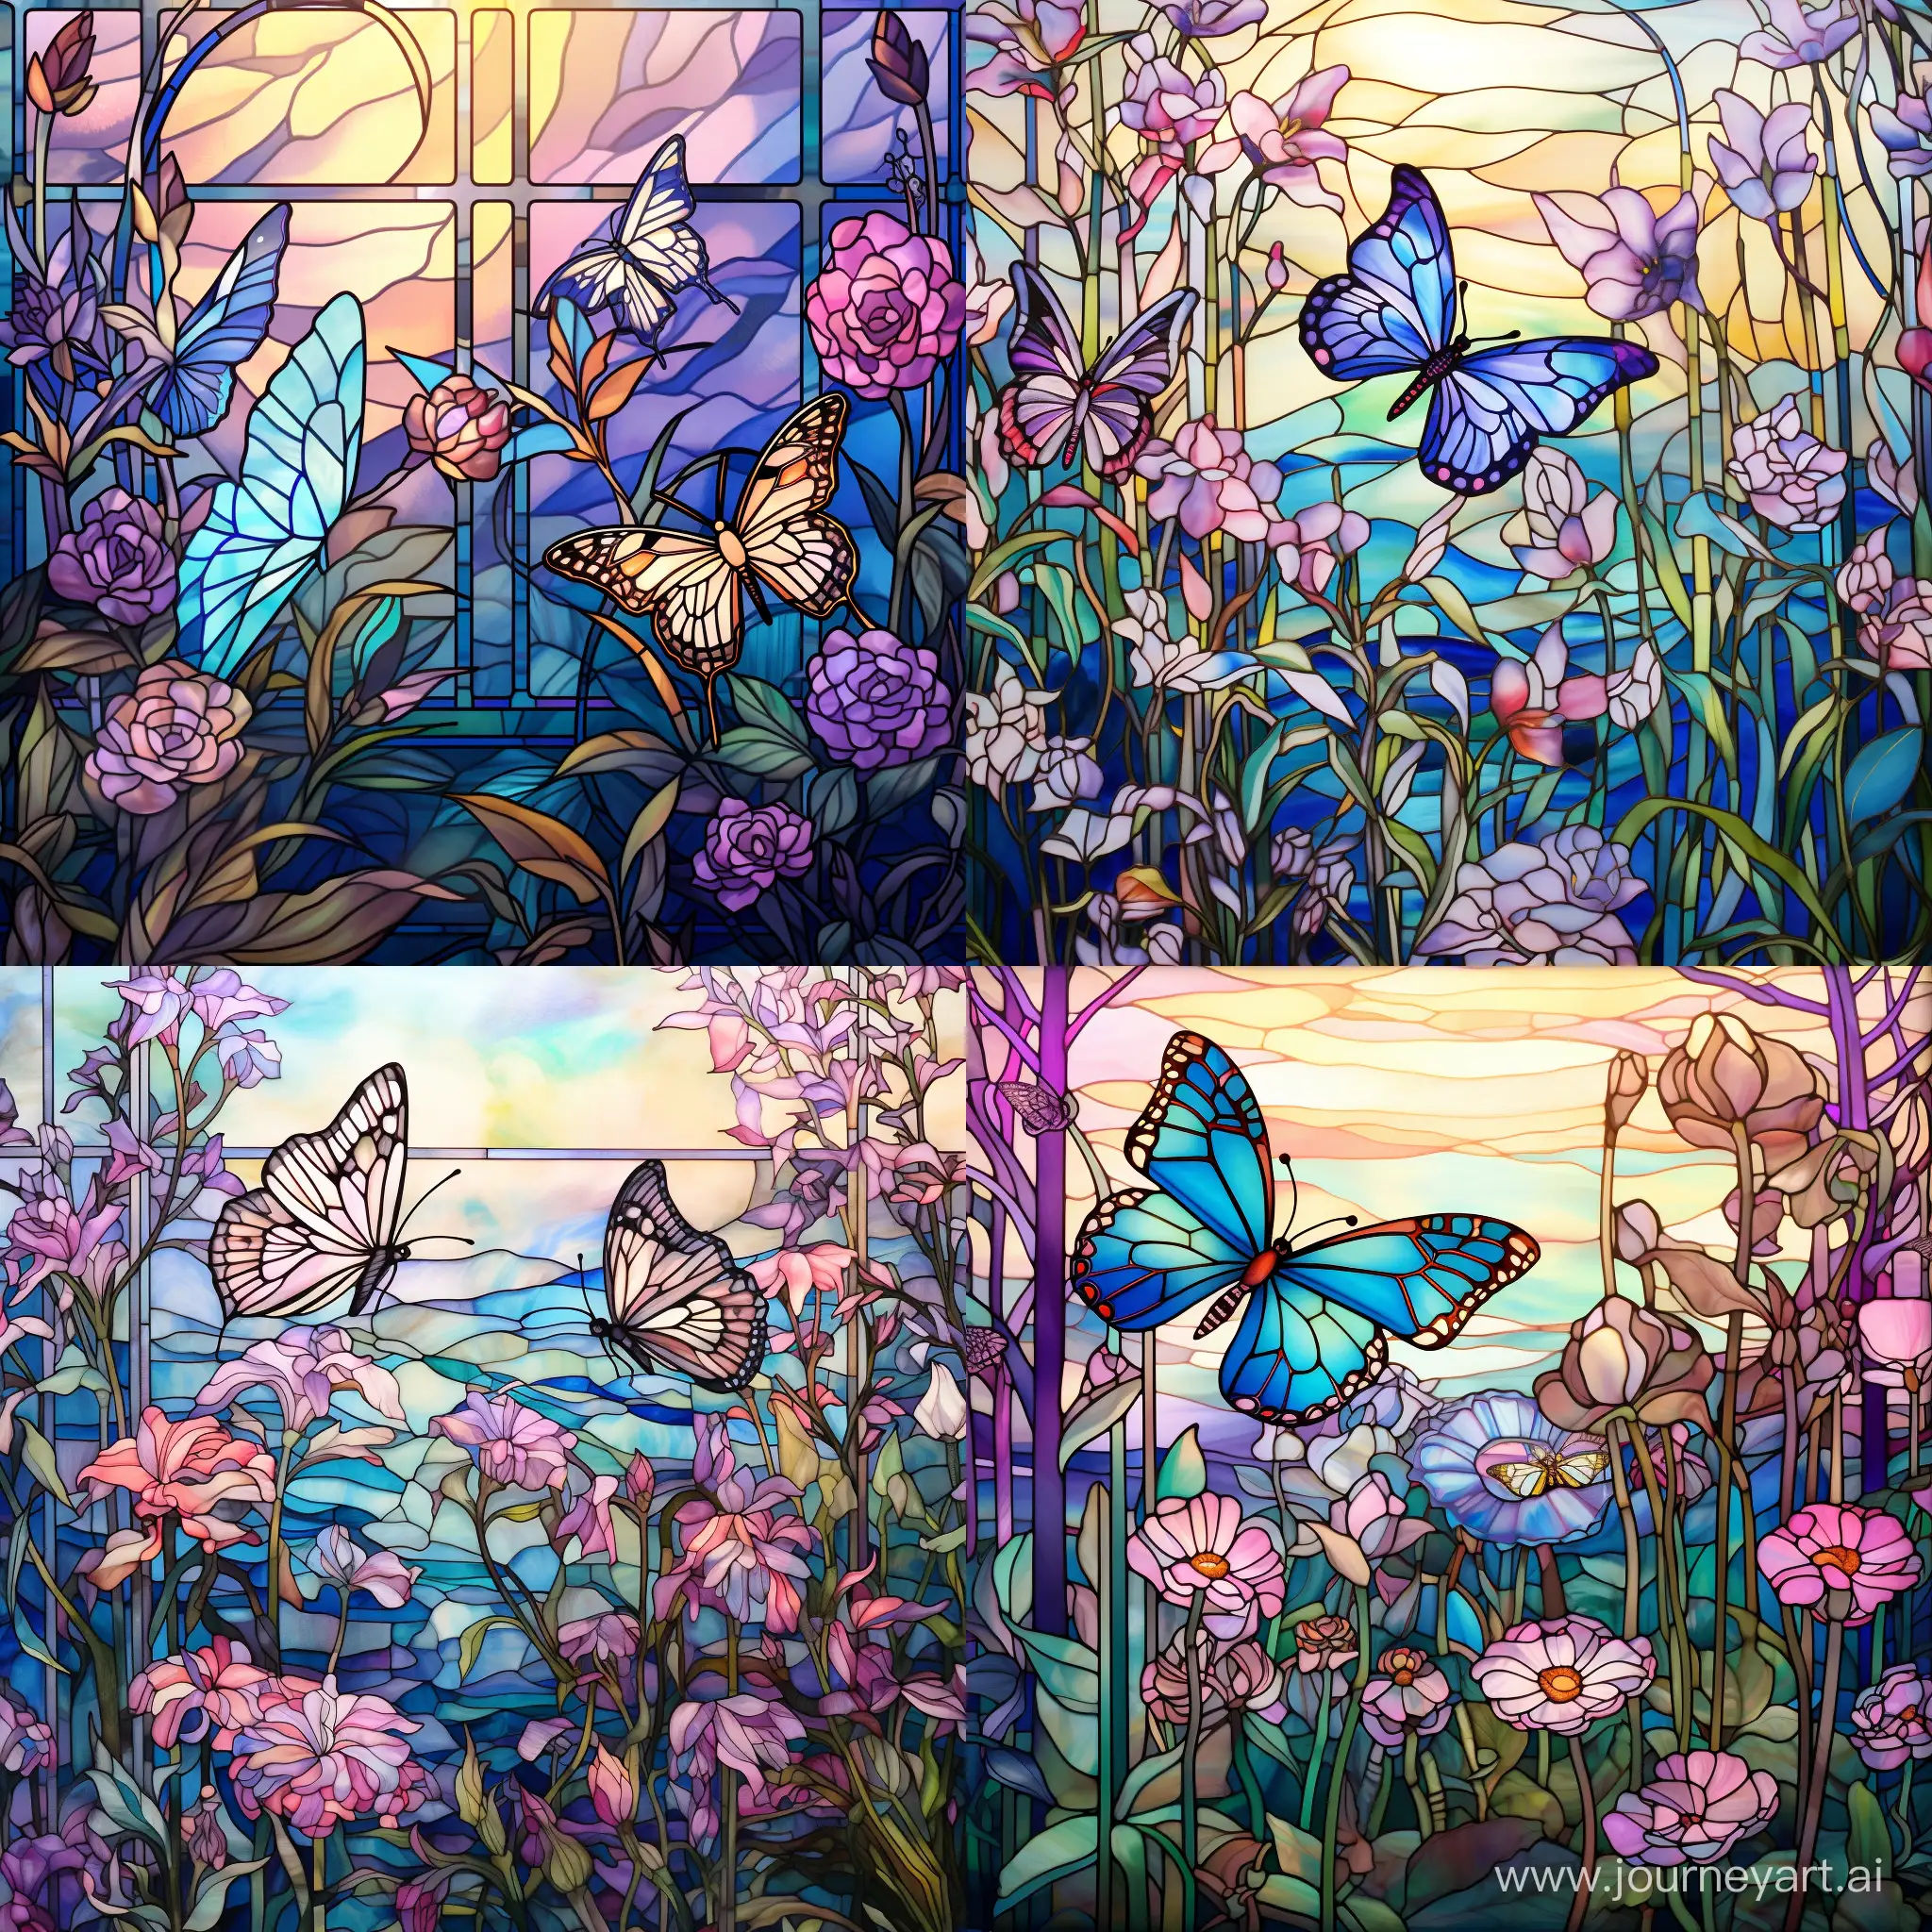 Stained glass butterflies fluttering through a wildflower garden at golden hour on stained glass. The butterflies are shades of soft blues, teals, whites, purples. The flowers are soft pastel shades of pink, white and soft buttery yellow. The butterflies are iridescent and seem to shimmer in the light and subtly change color in the light.